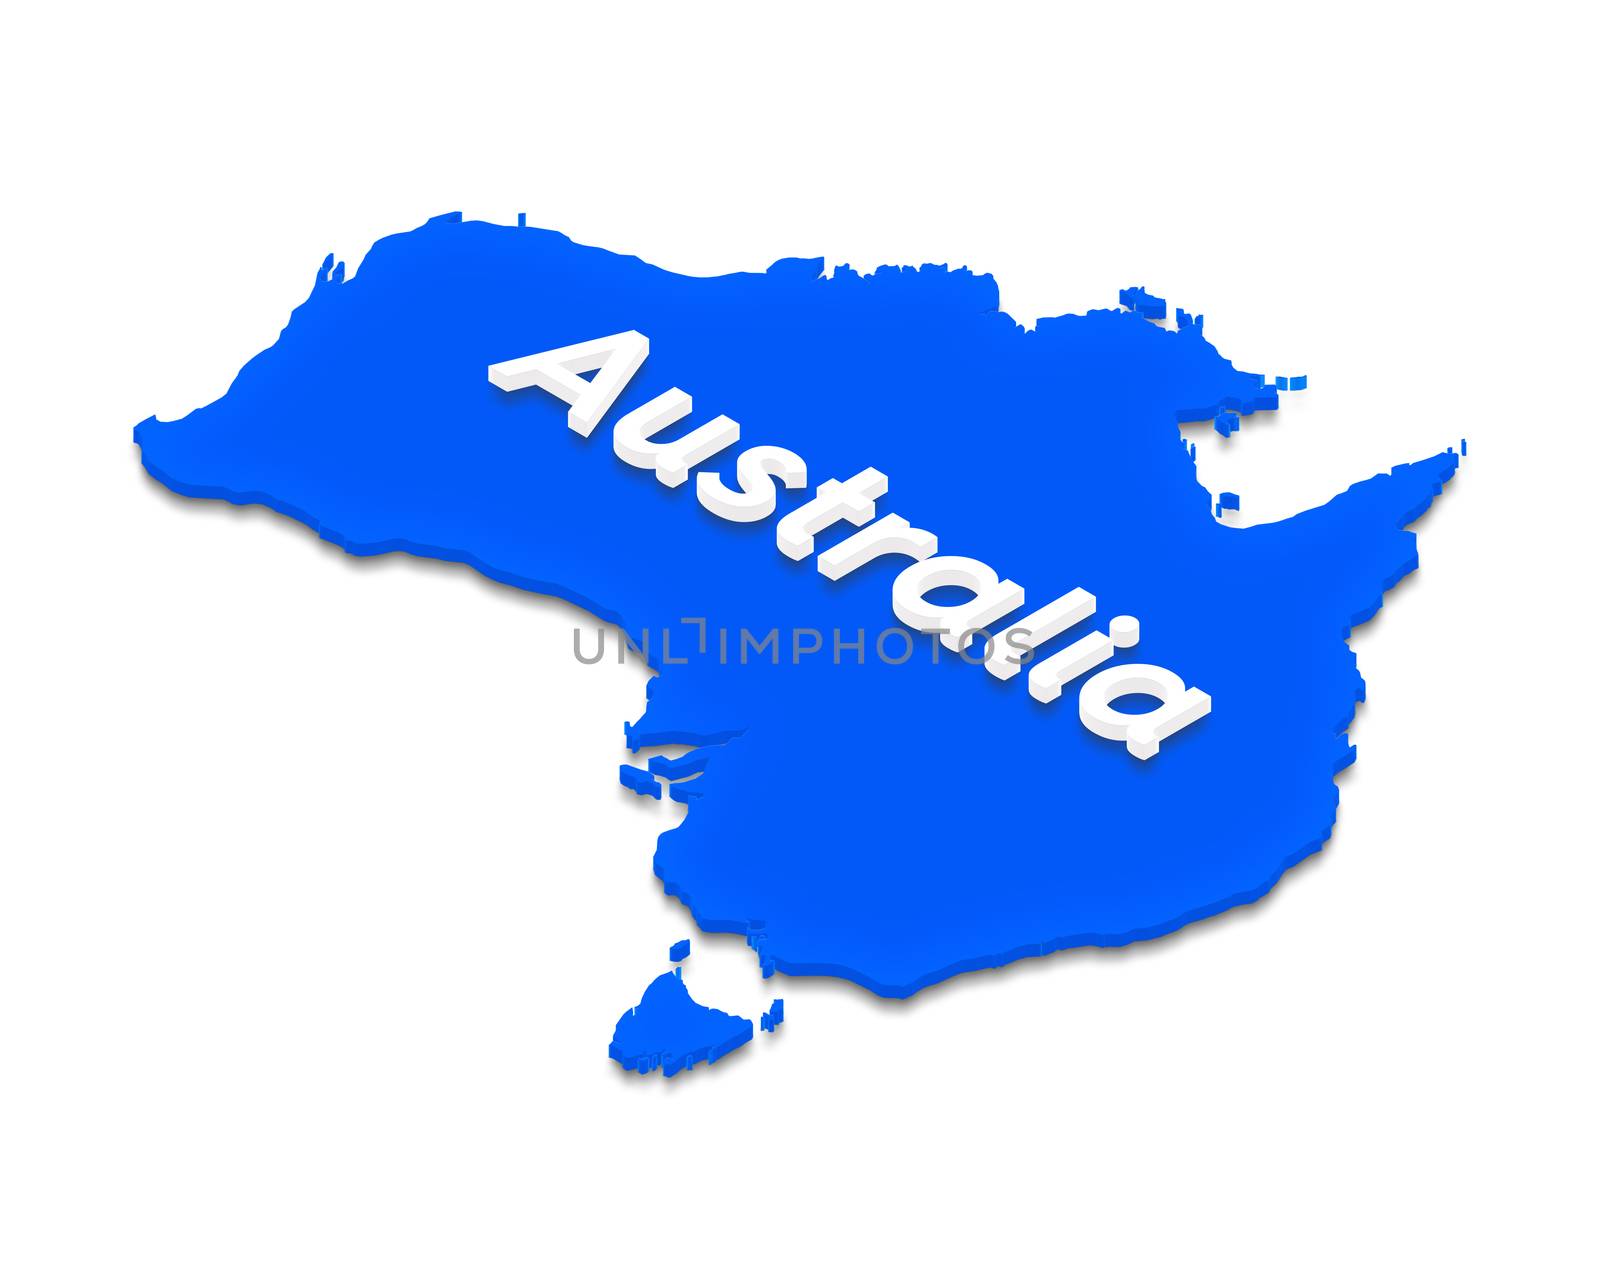 Illustration of a blue ground map of Australia on isolated background. Left 3D isometric projection with the name of continent.